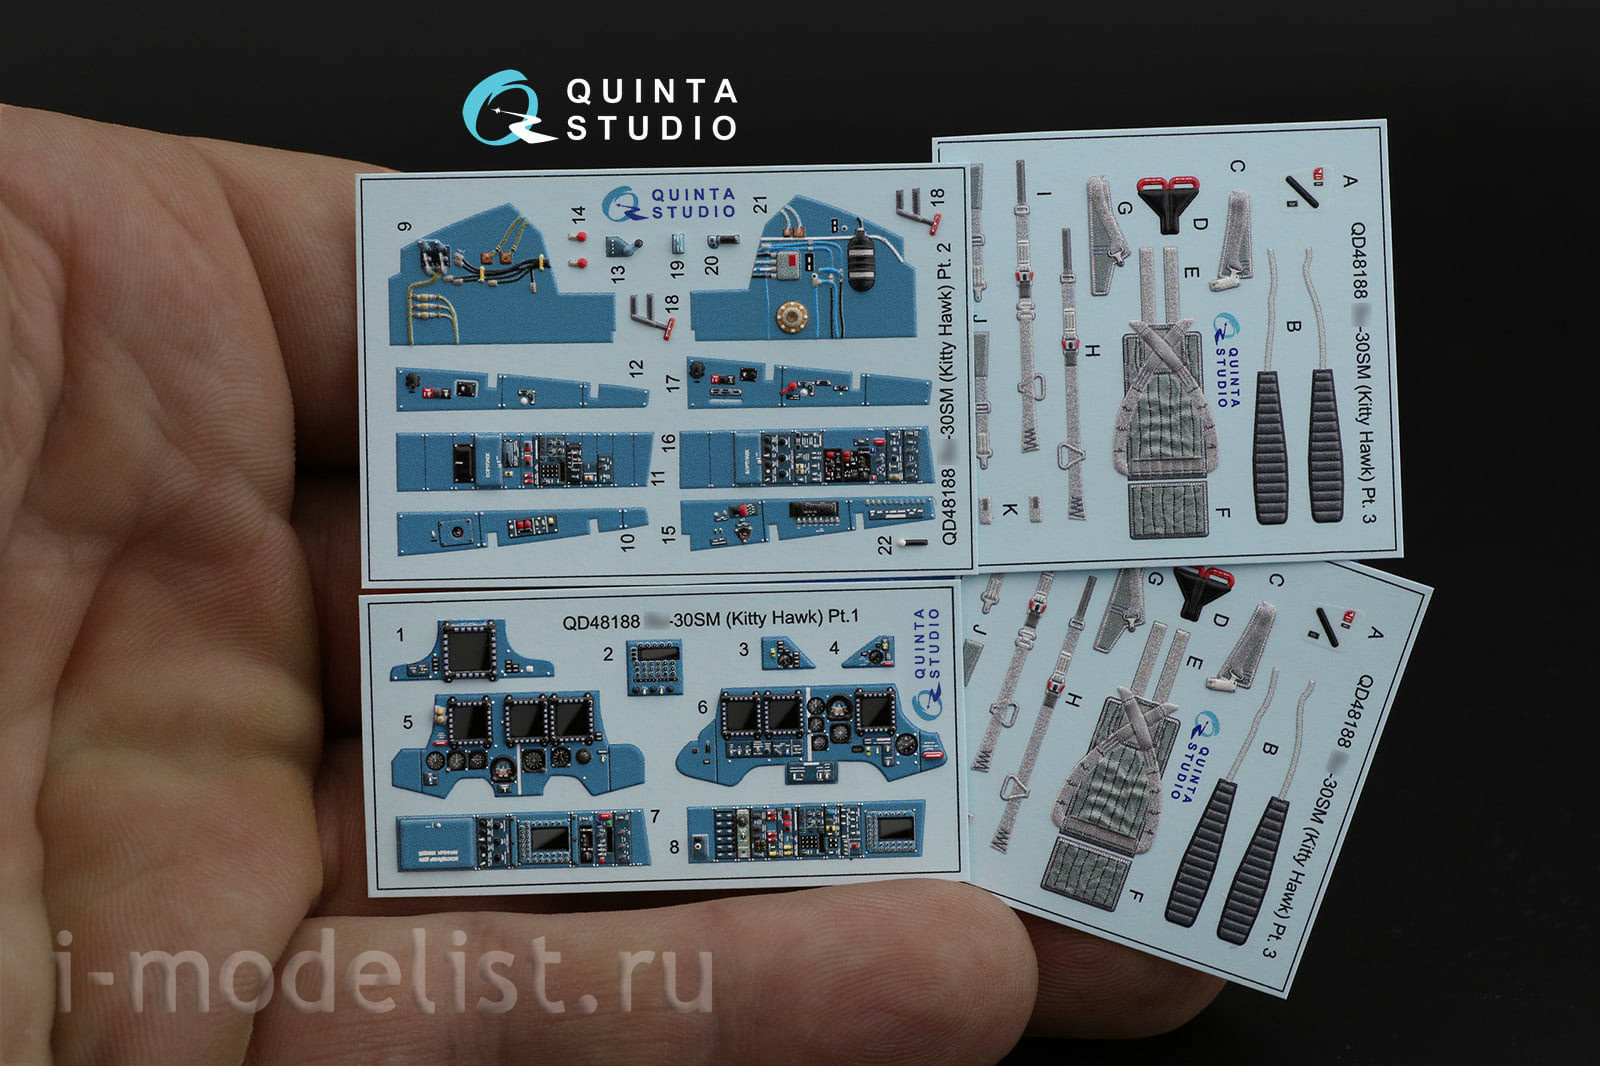 QD48188 1/48 3D Decal of the cabin interior Sukhoi-30CM (for the KittyHawk model)